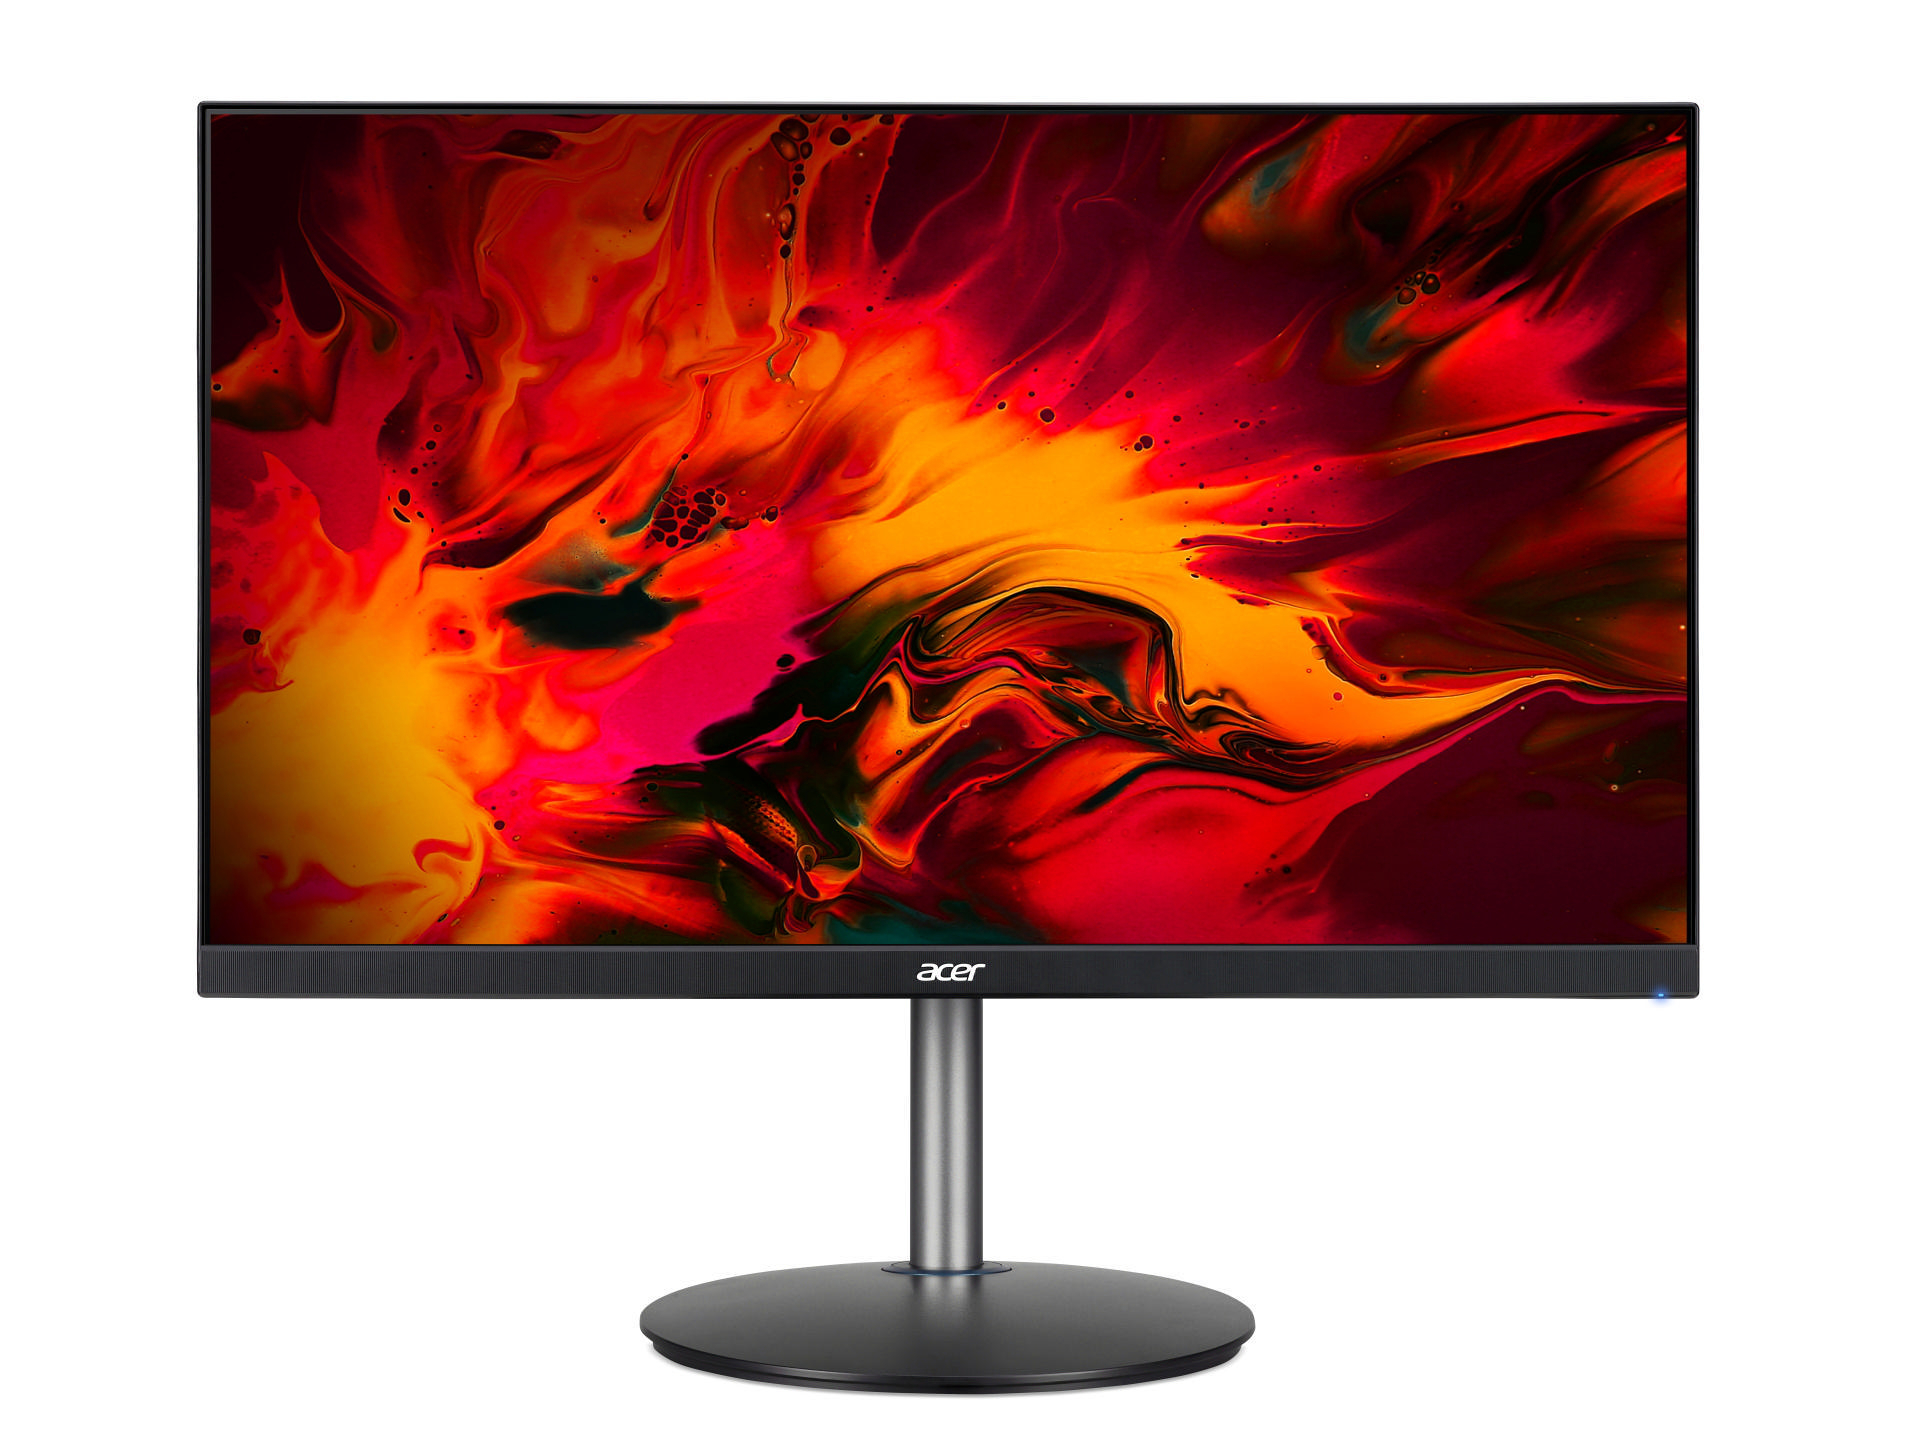 Hz Overclocking, Reaktionszeit, Gaming Monitor Zoll Hz Nitro Normal) 144 ms Full-HD ACER XF243YP (2 23,8 165